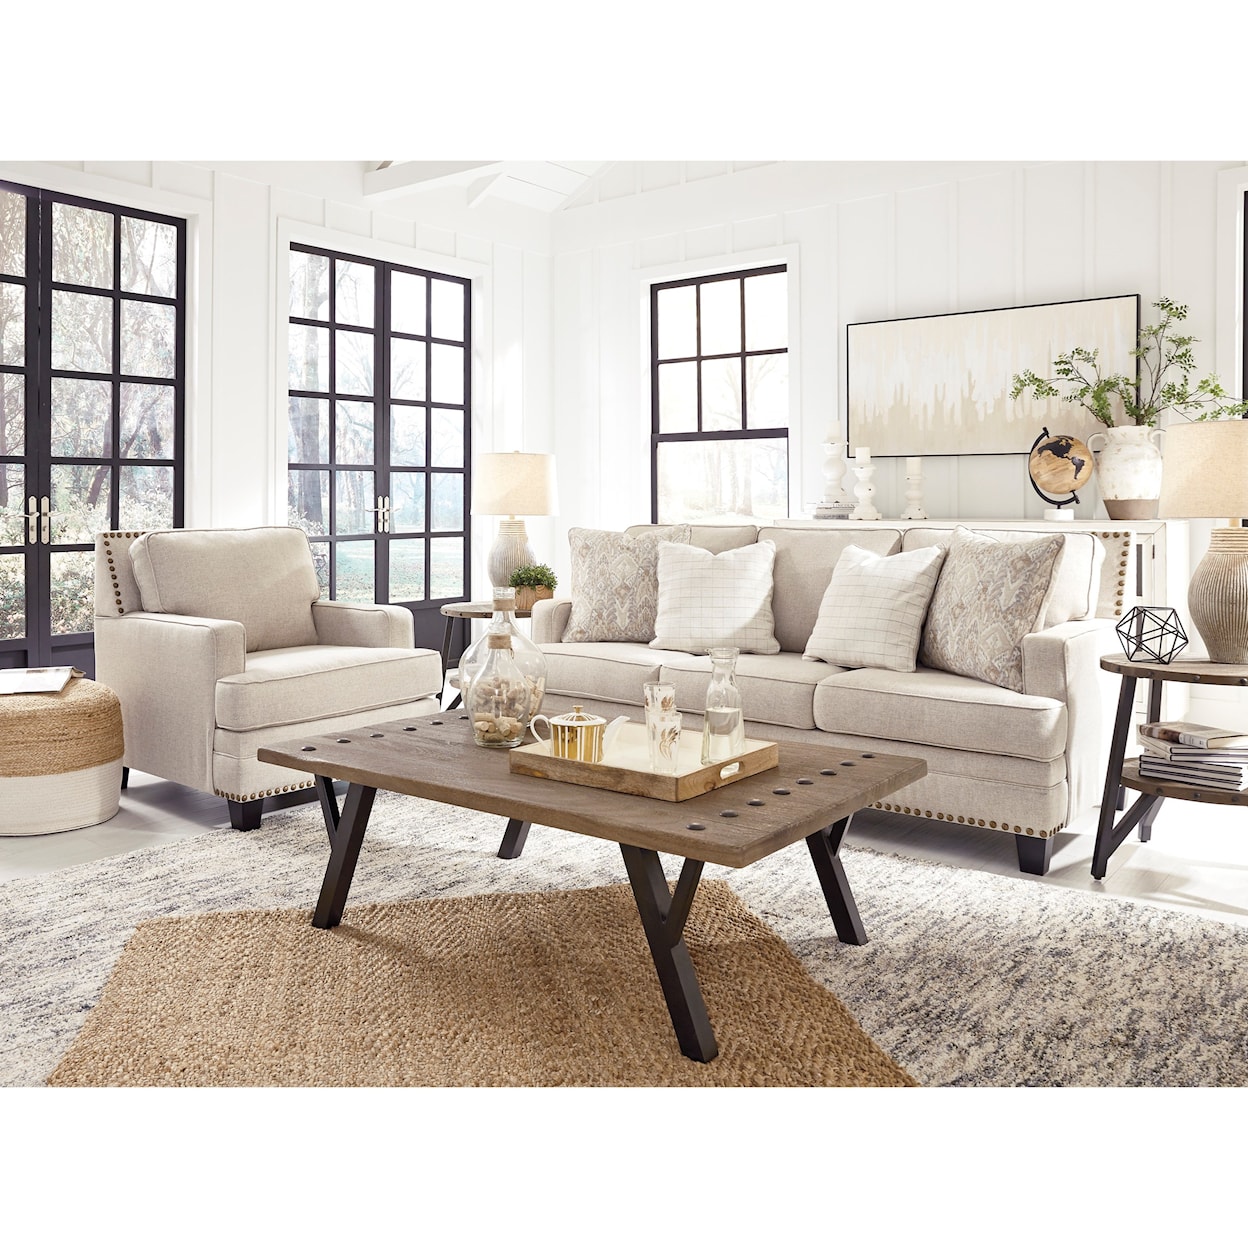 Benchcraft Claredon Living Room Group